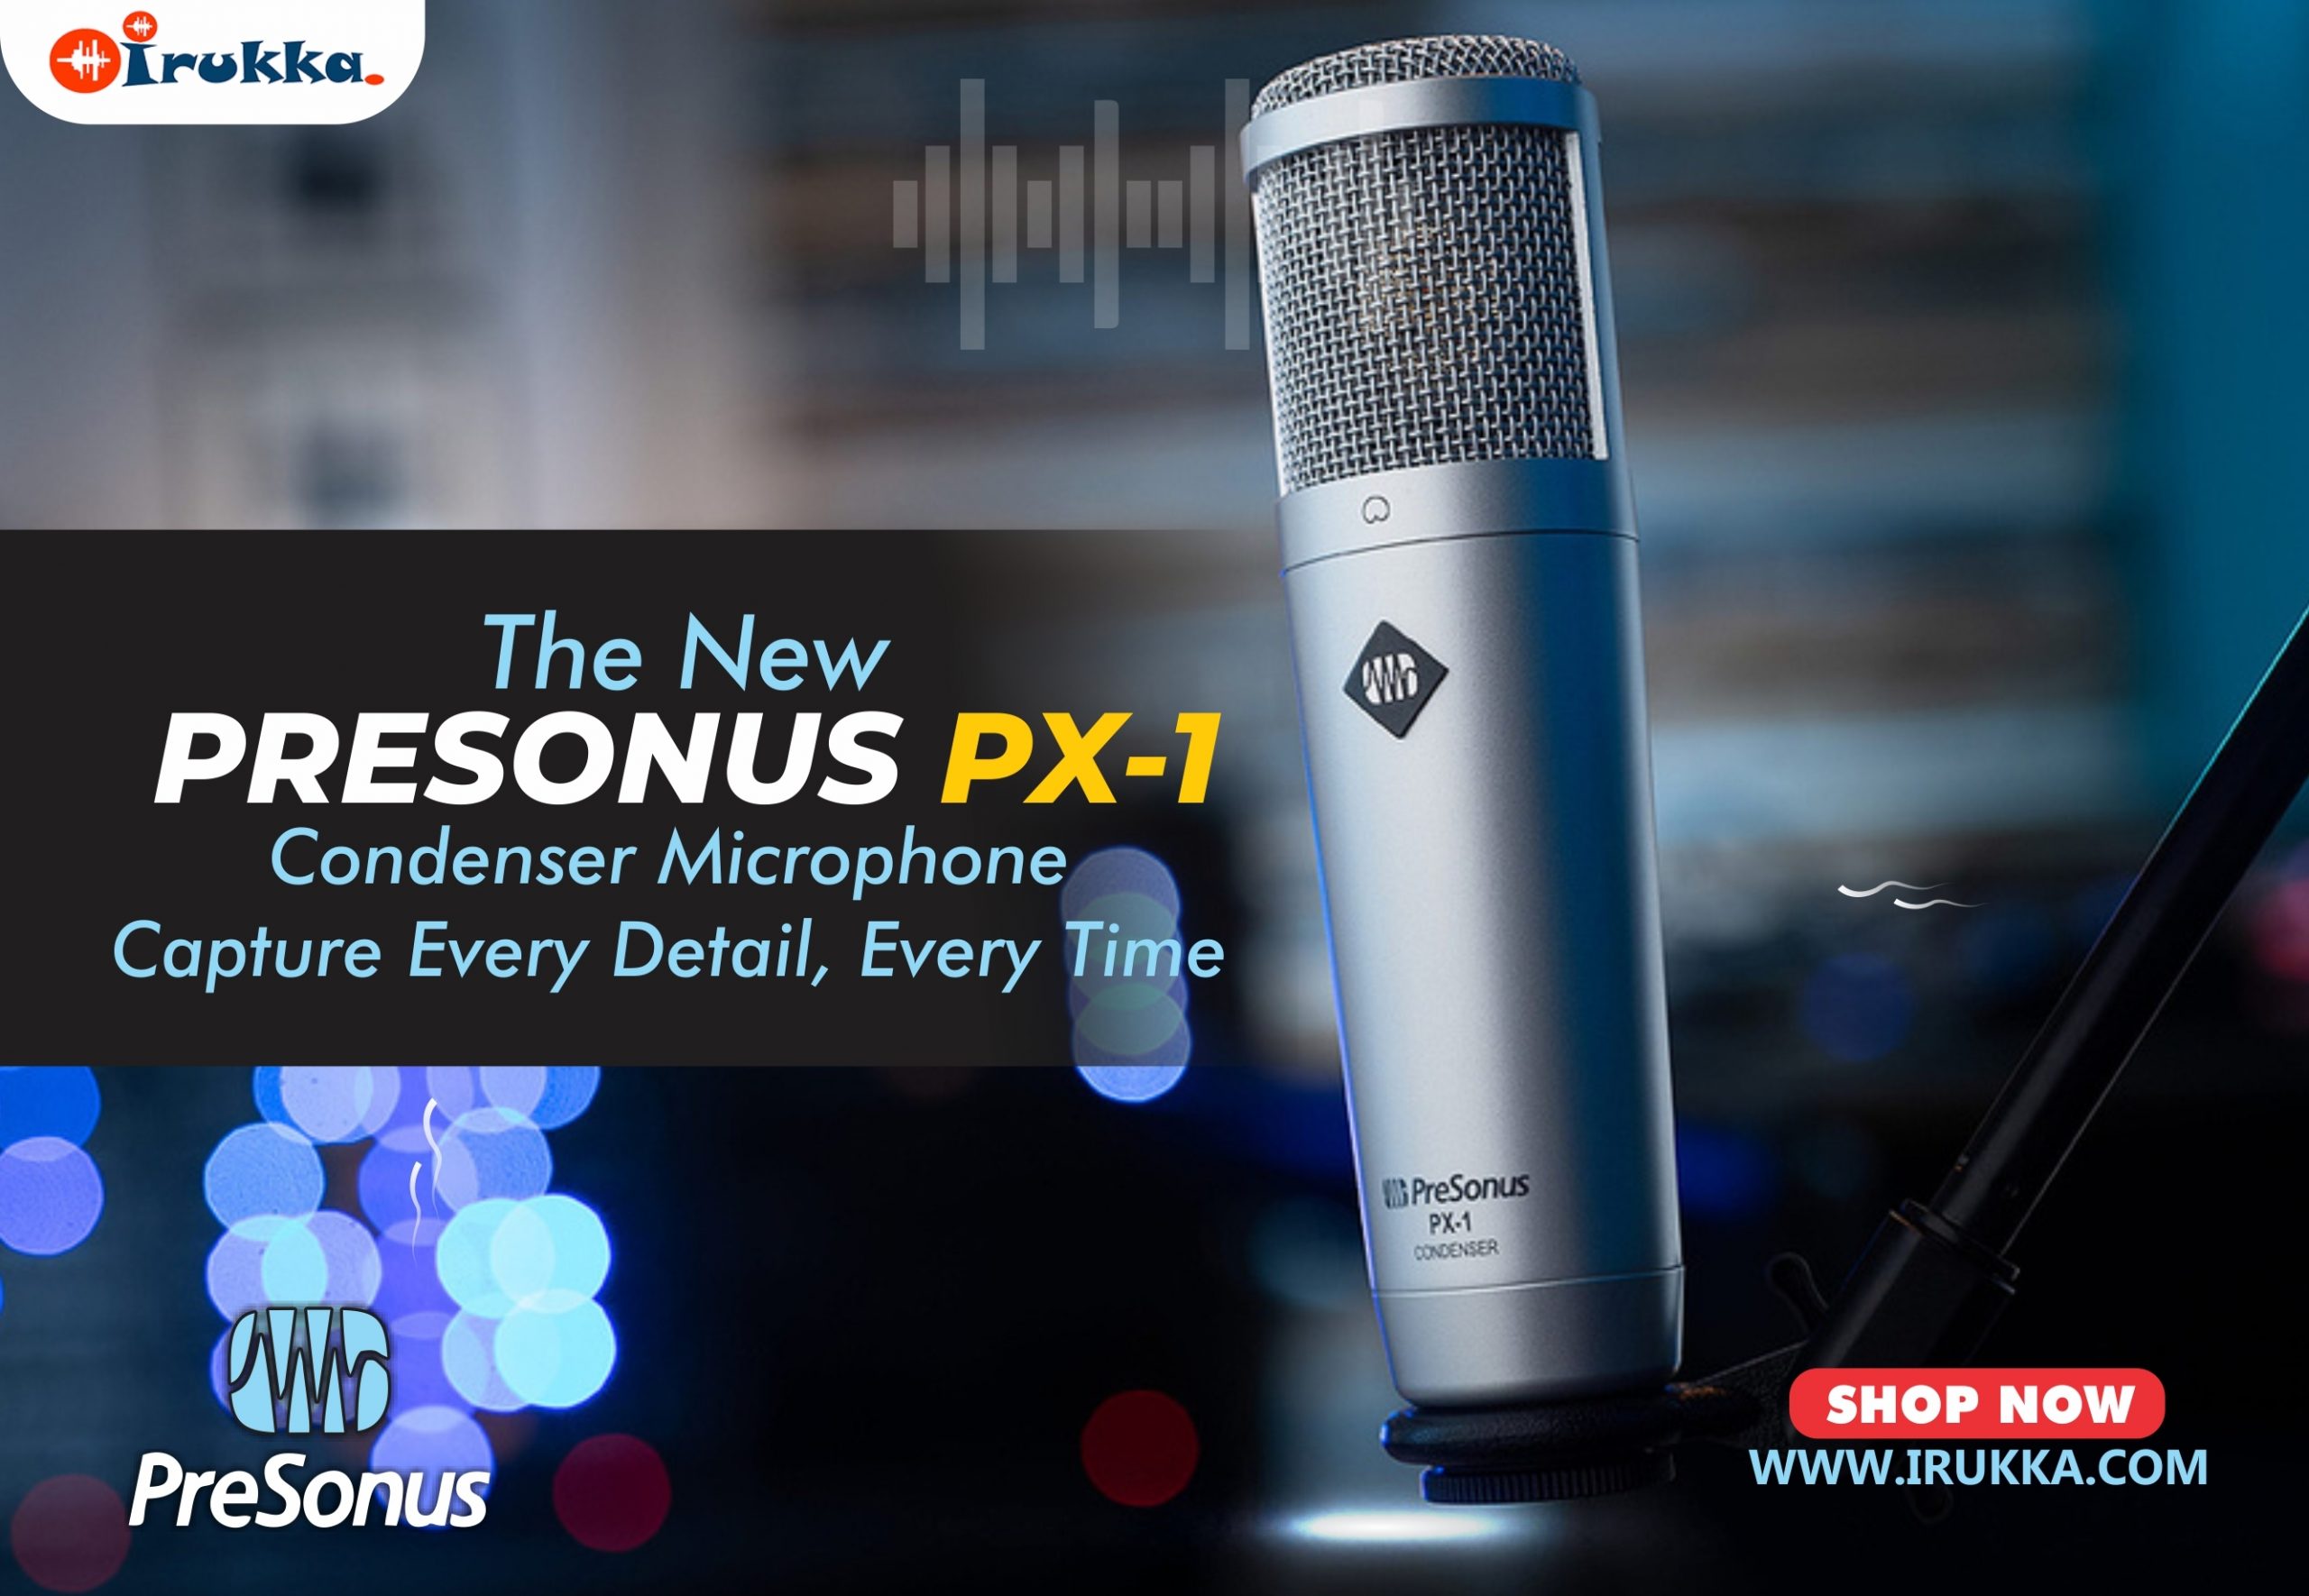 The New PreSonus PX-1 Condenser Microphone Capture Every Detail, Every Time